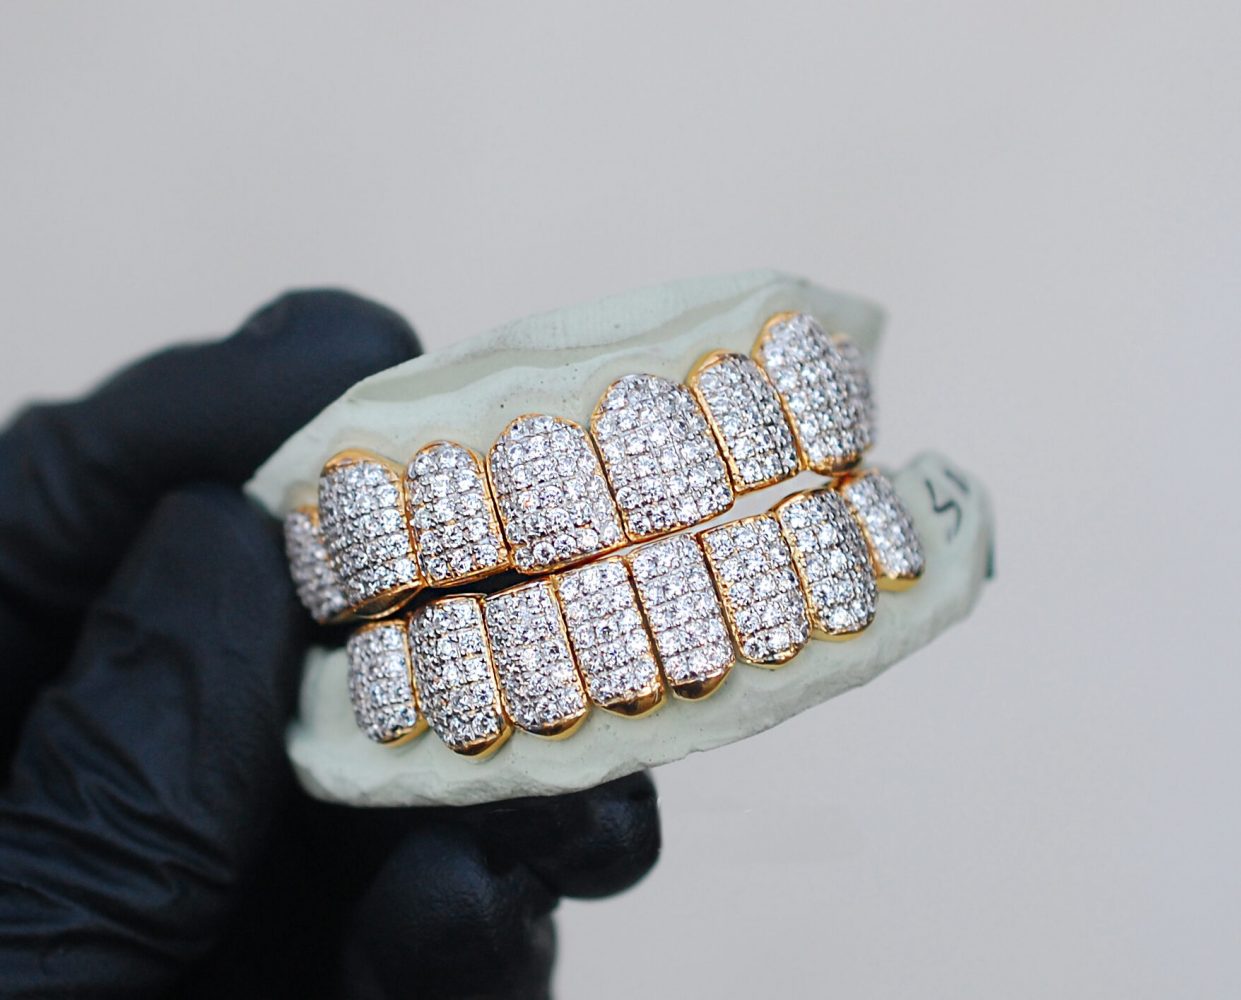 Top Iced Out Gold Grillz - Brand New Diamond Grill 100% authentic.